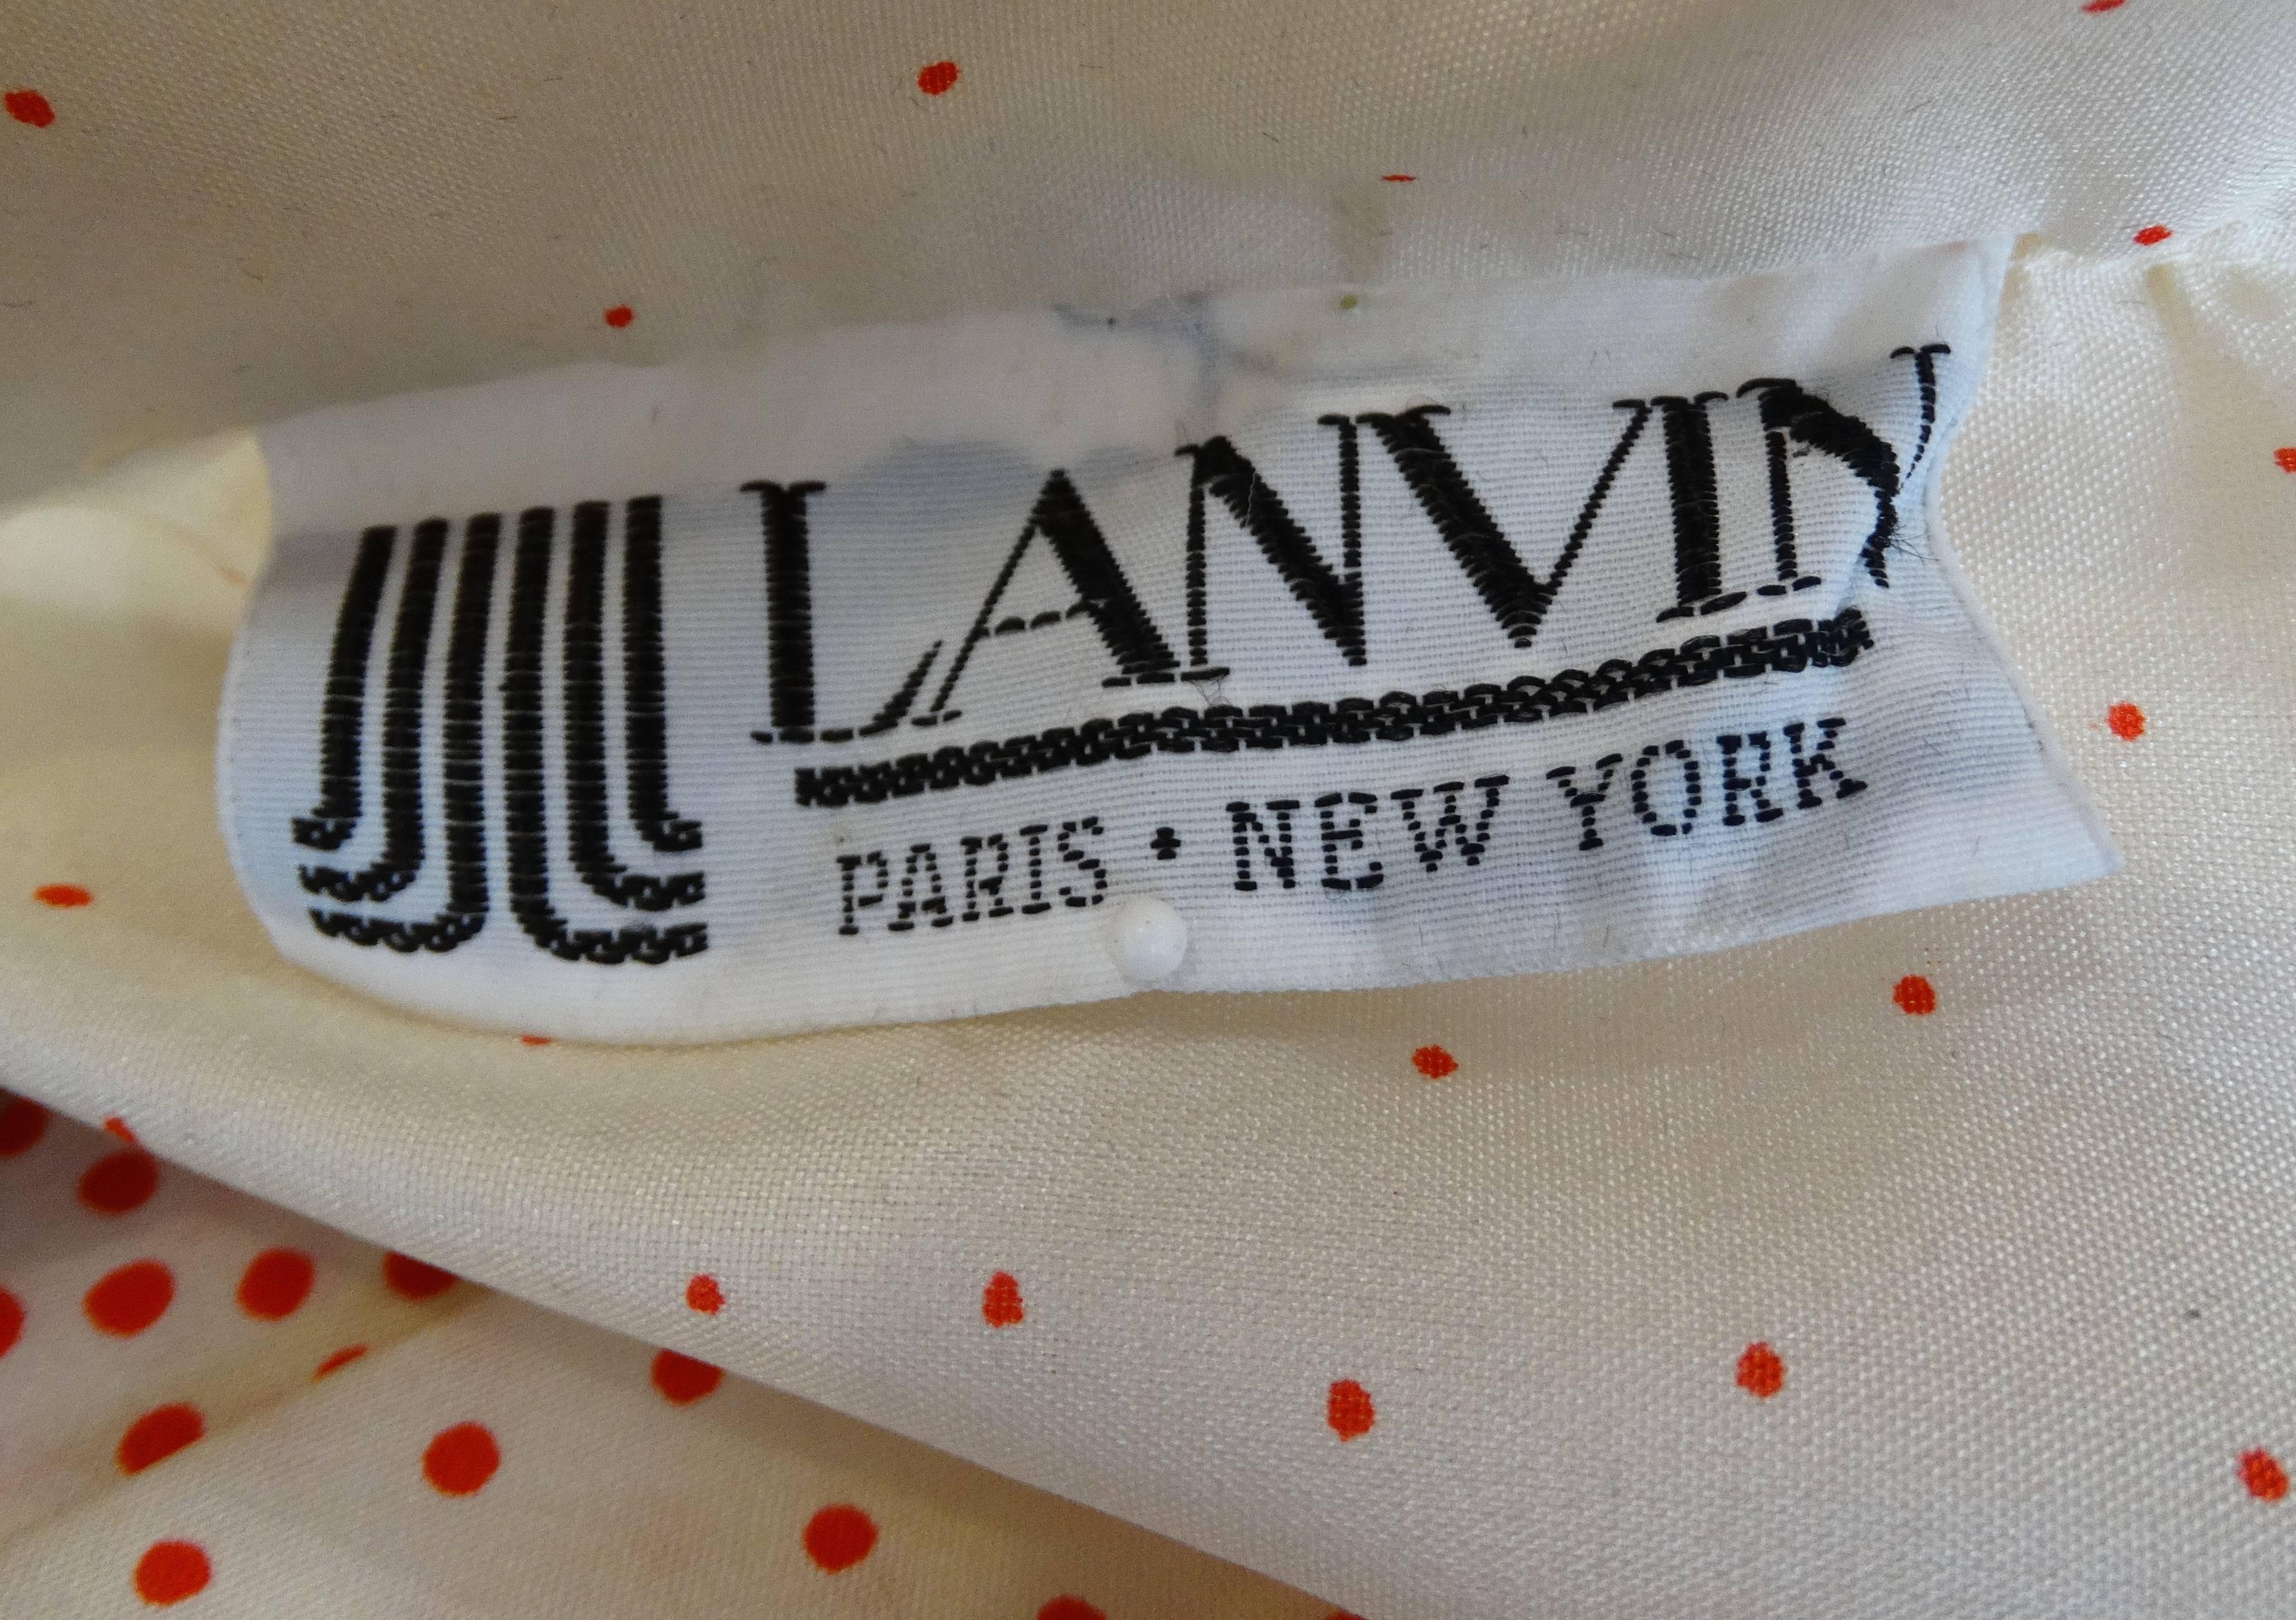 1960s Lanvin Cream & Red Polkadot Floral Dress For Sale 4